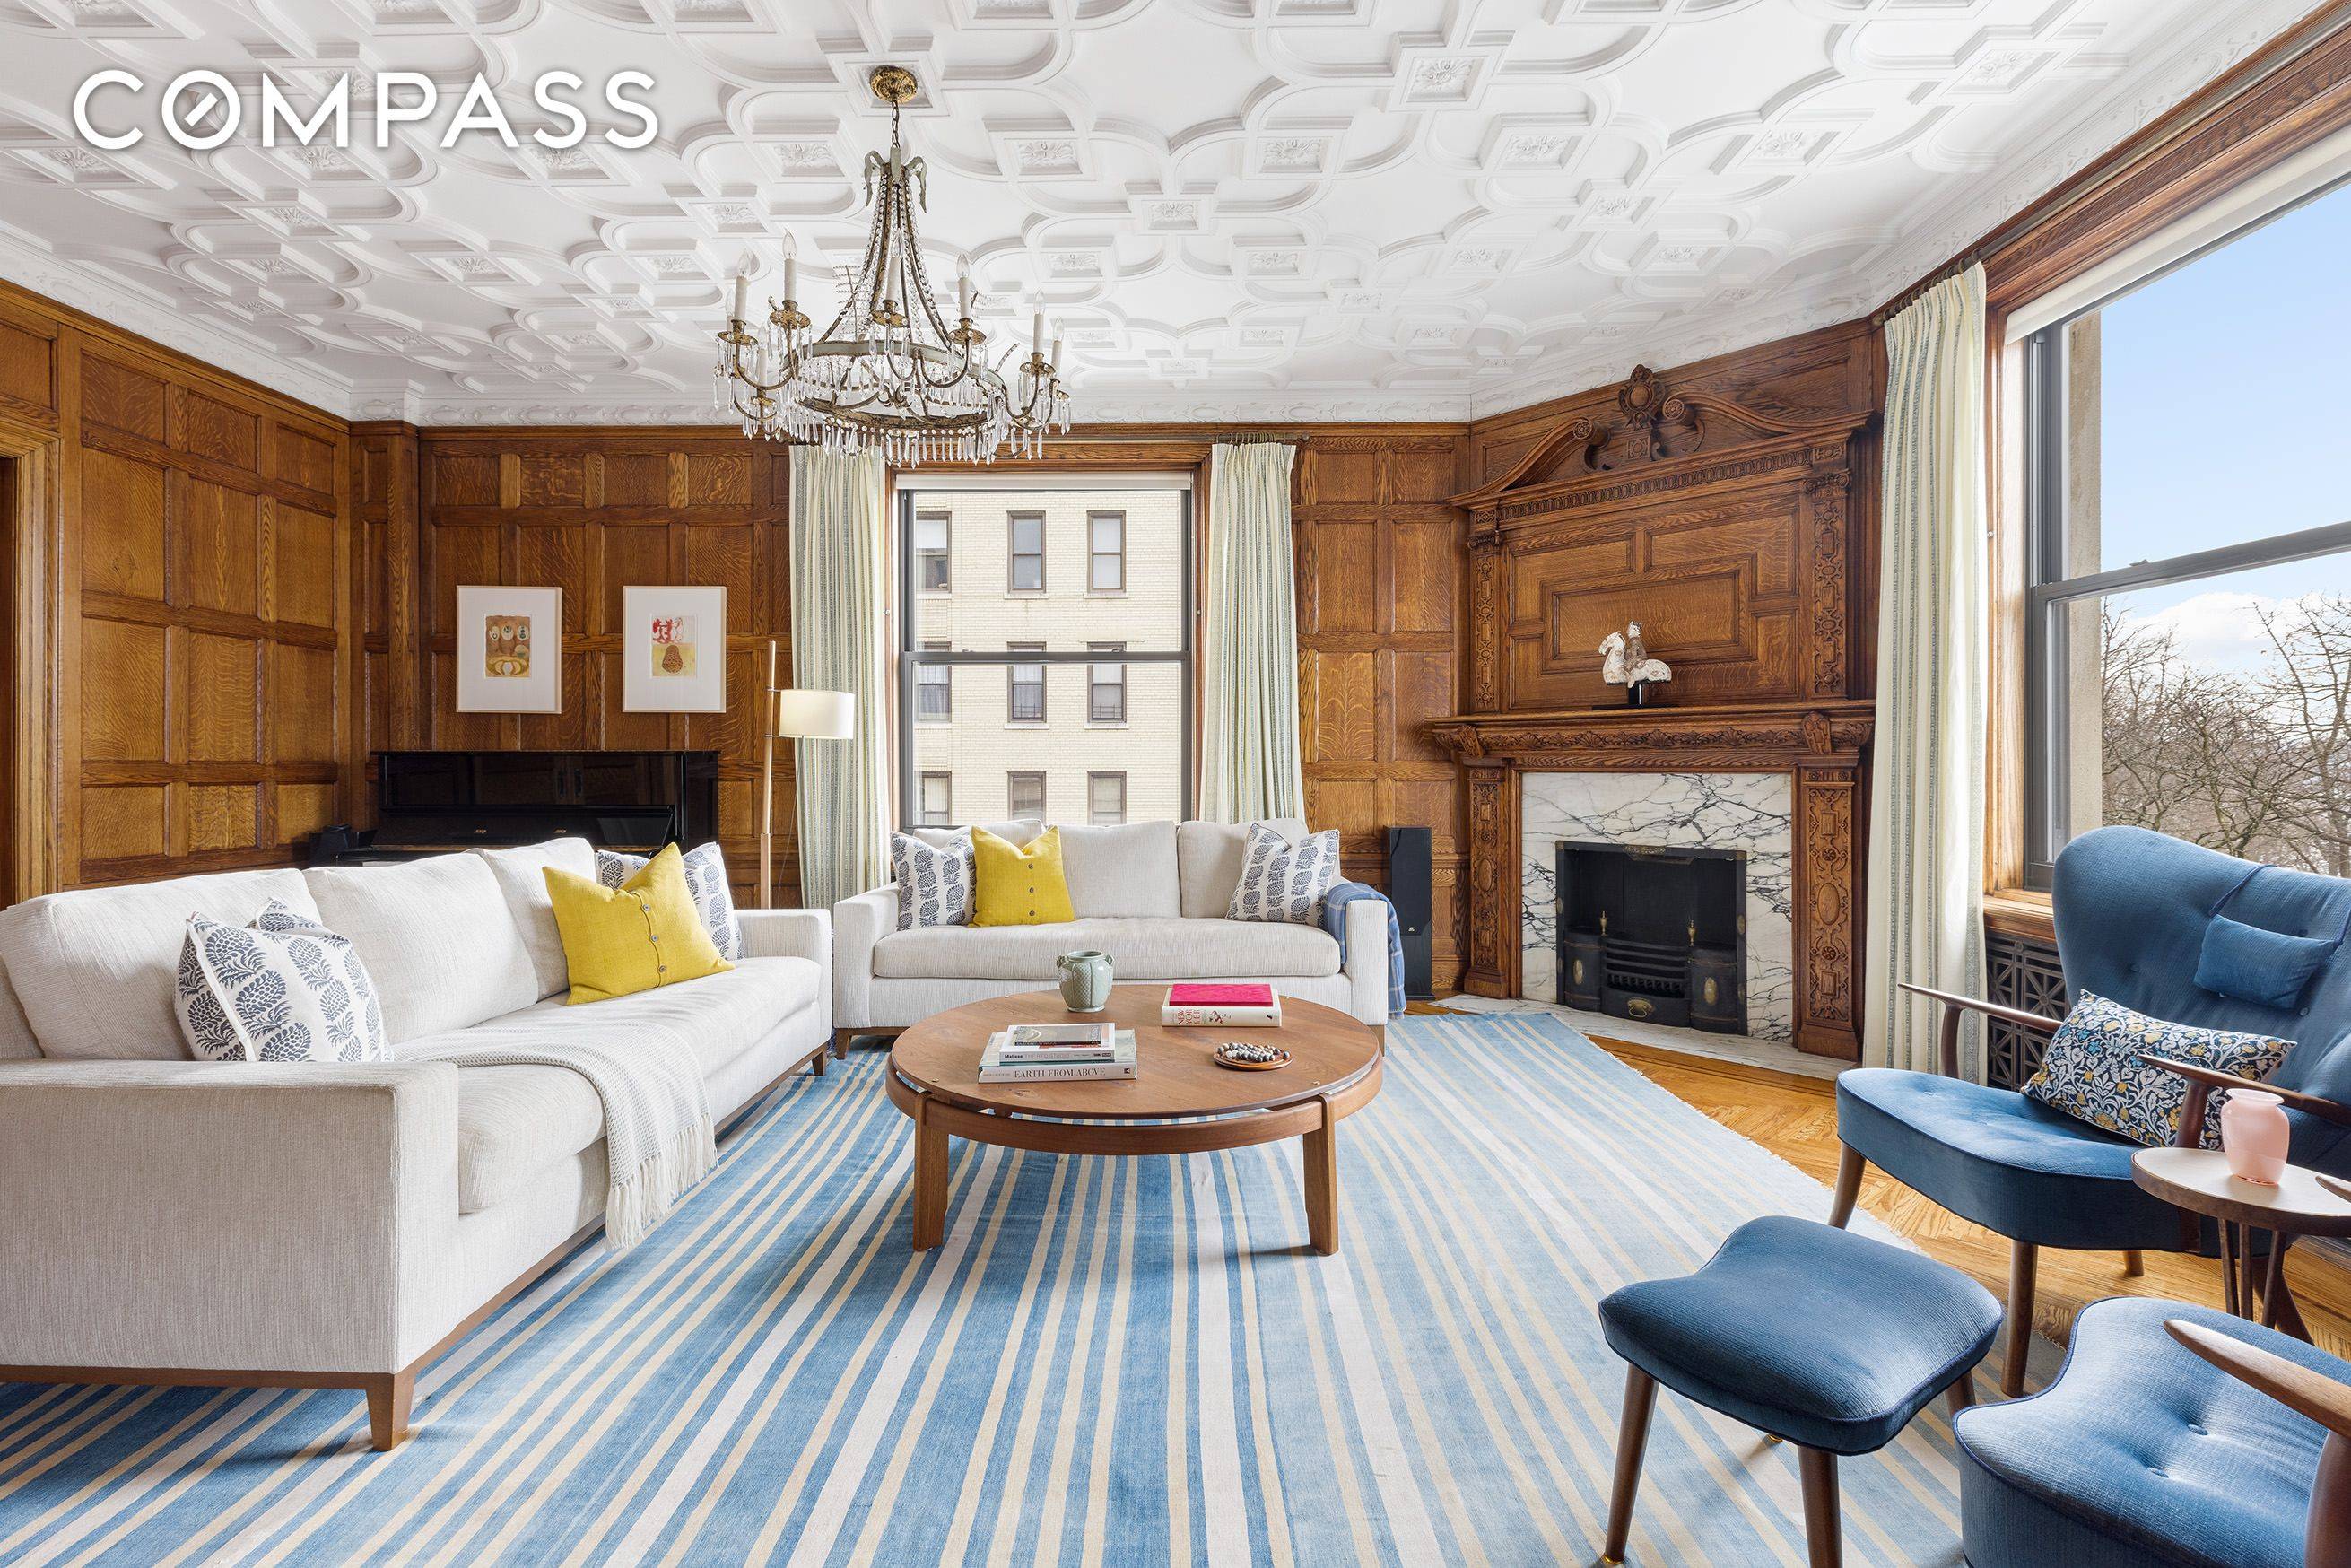 Welcome to this exquisite, historic, mint 9 room prewar home located in a full service Upper West Side condominium !